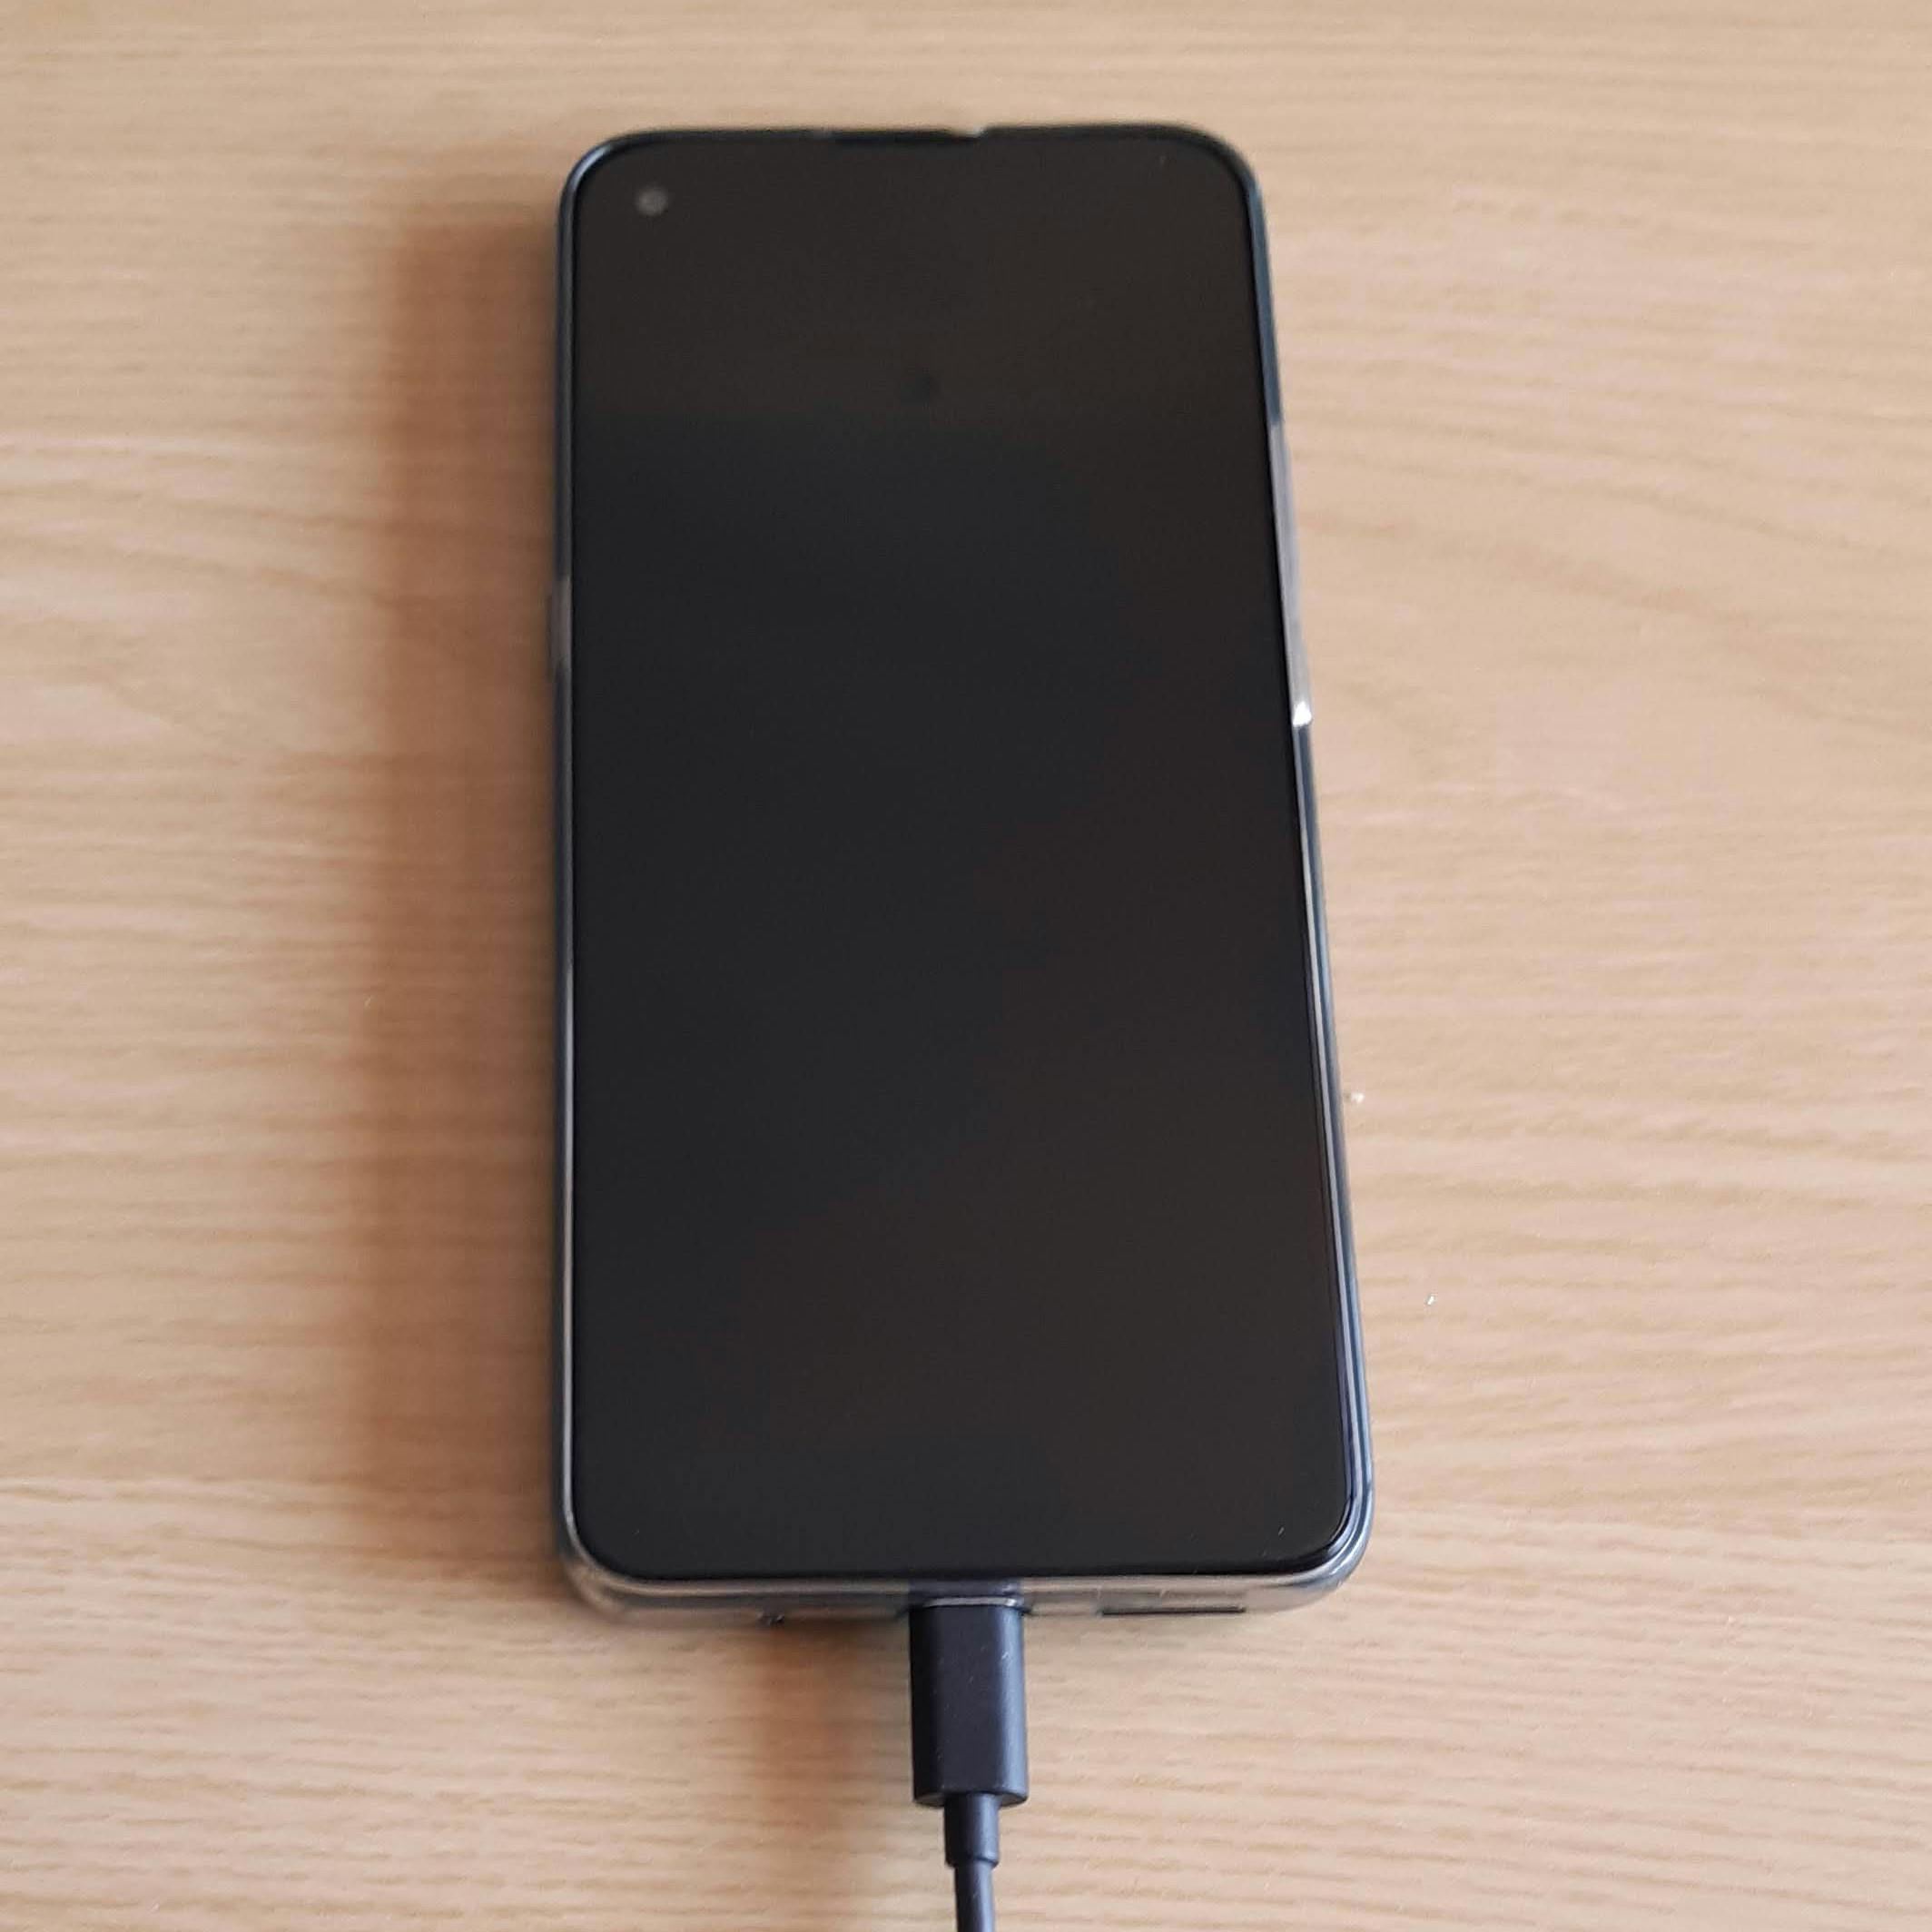 A smartphone with charging cable plugged in on a table